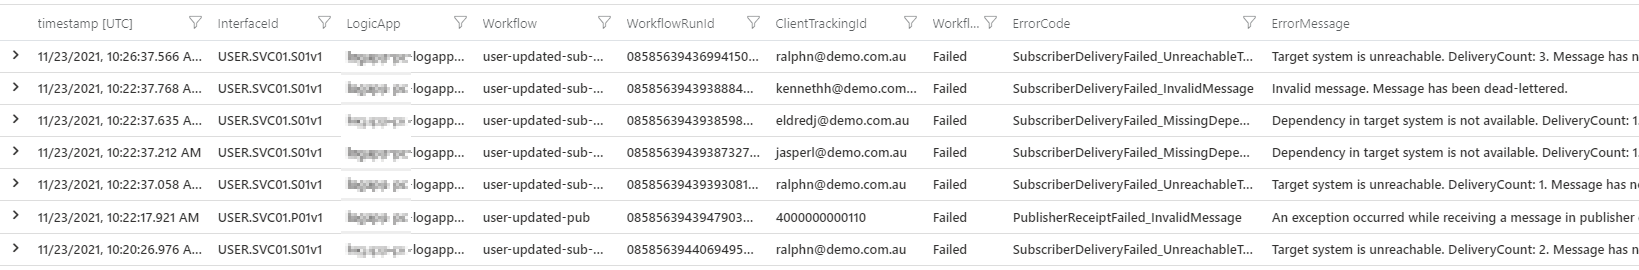 Sample query result of failed workflow instances including error code and error message